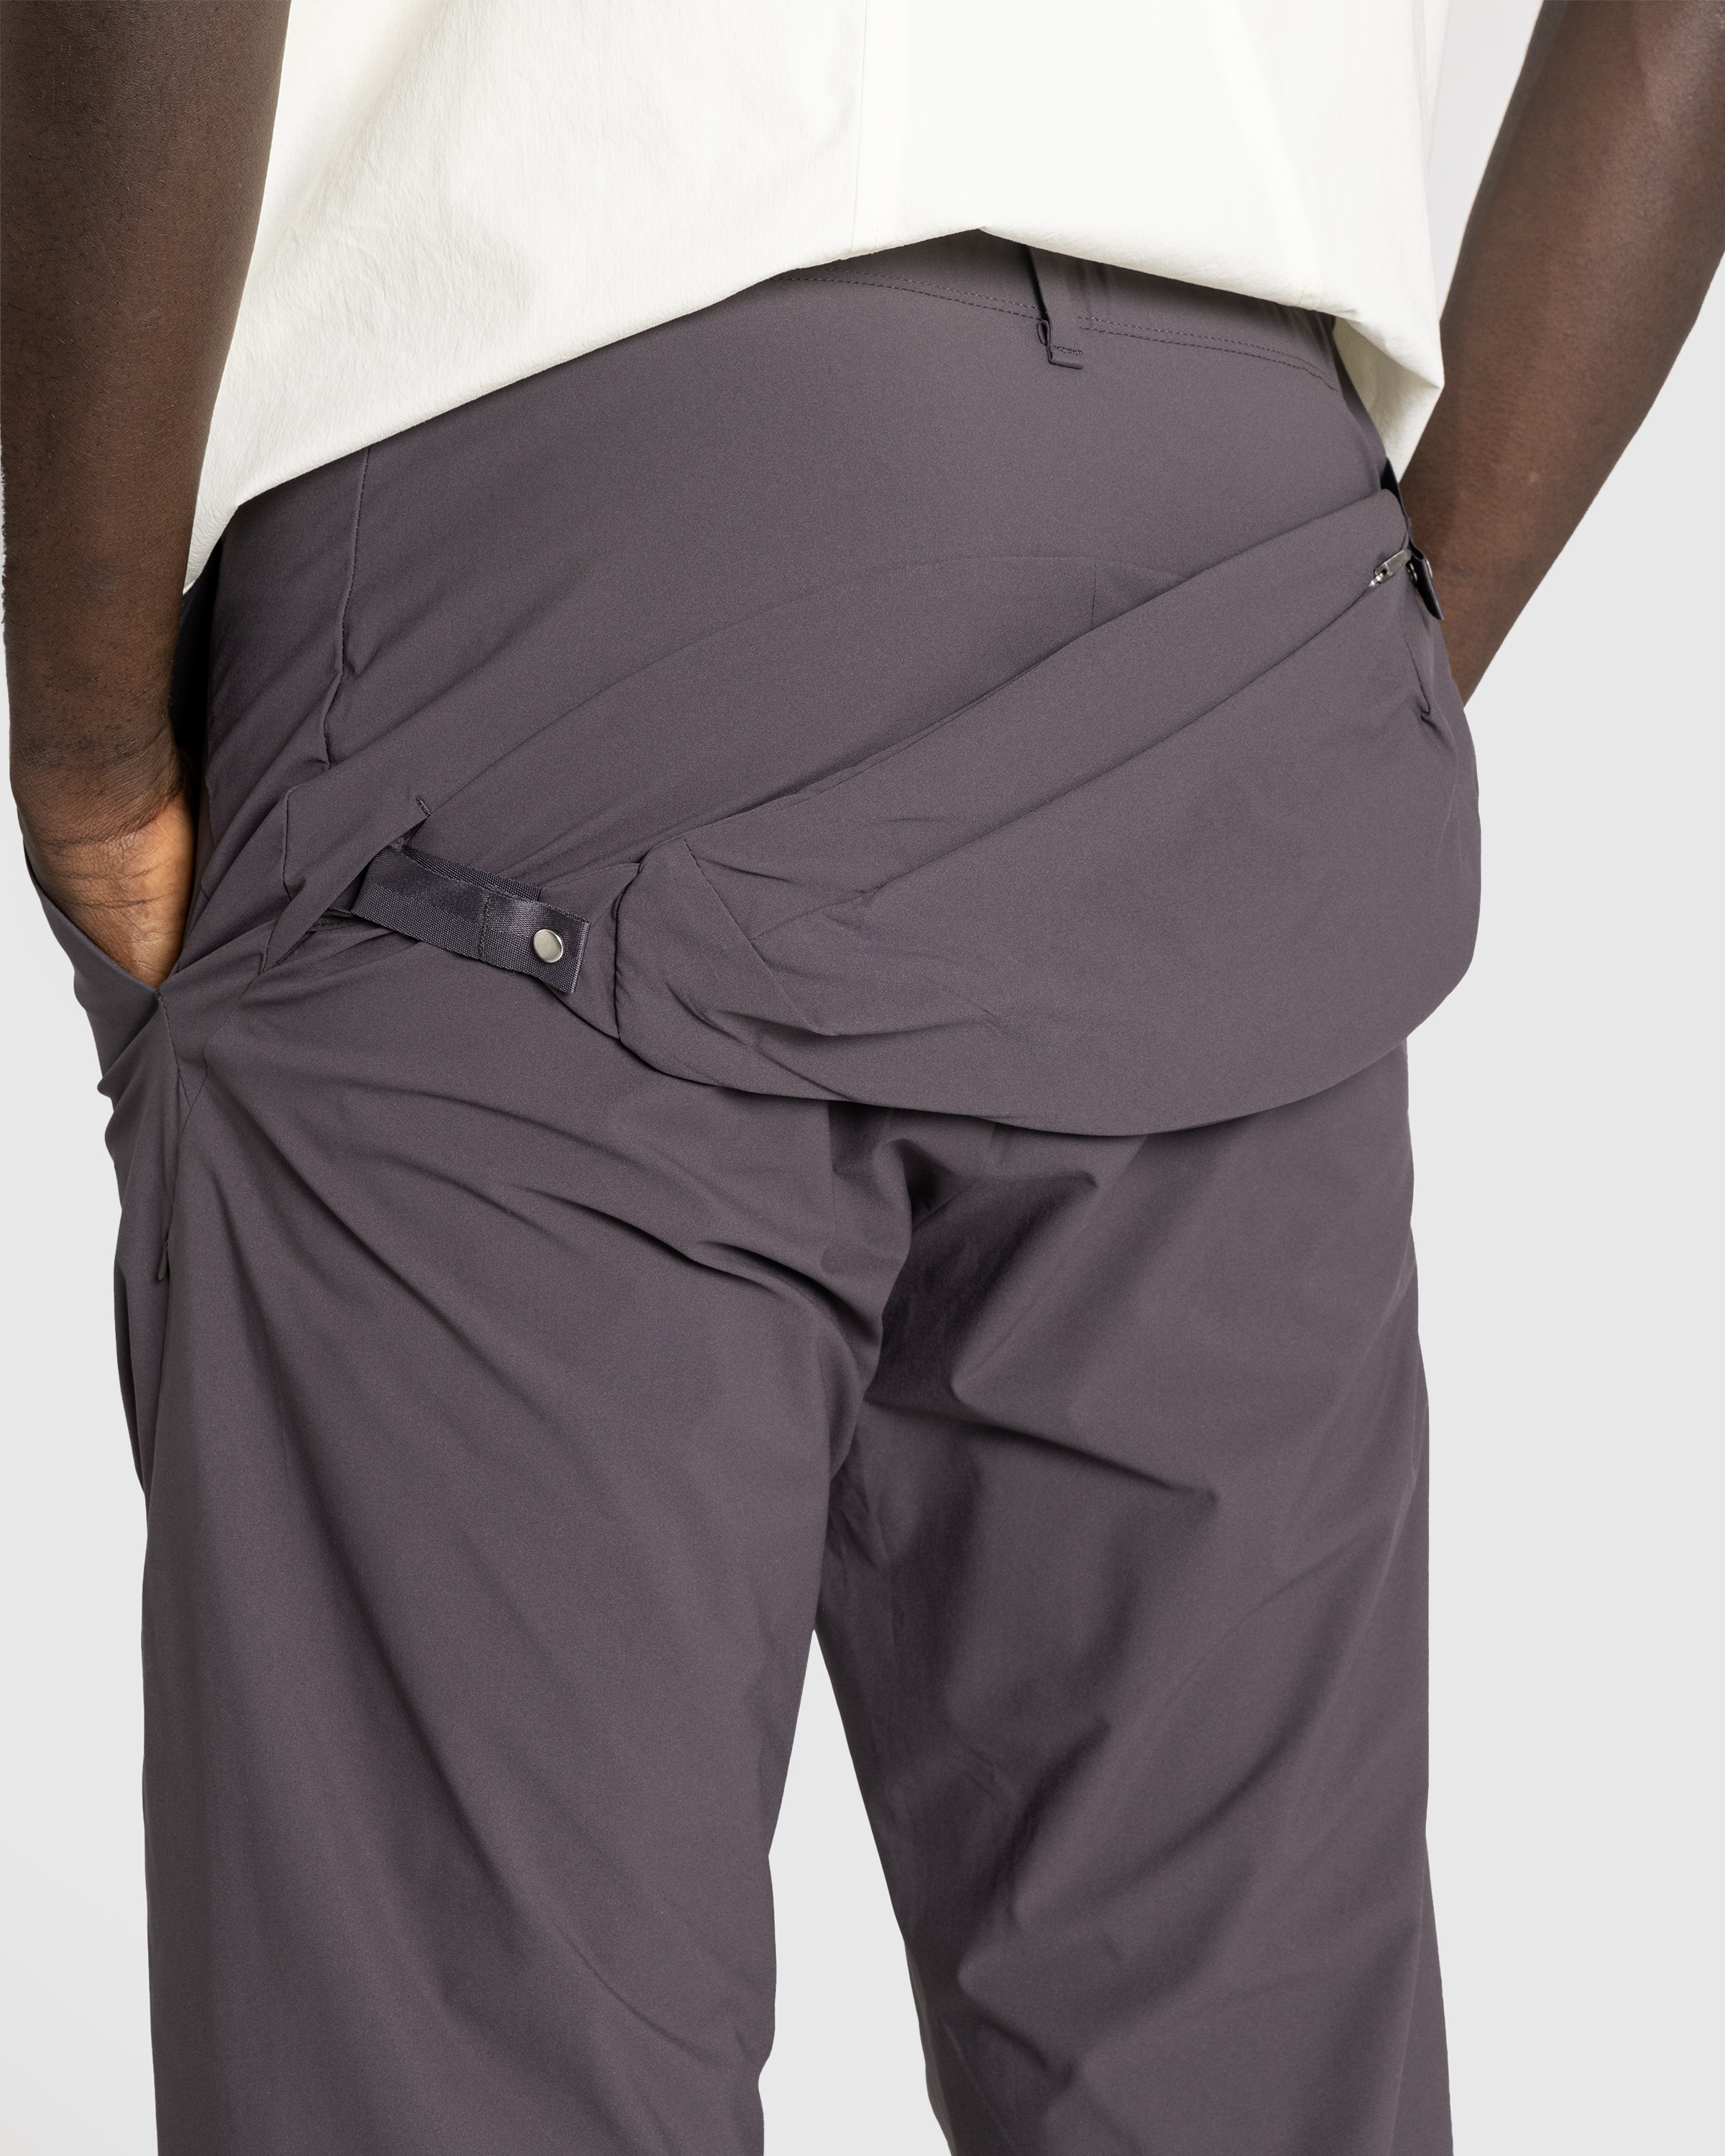 Post Archive Faction (PAF) – 6.0 Technical Pants Right Brown - Trousers - Brown - Image 5